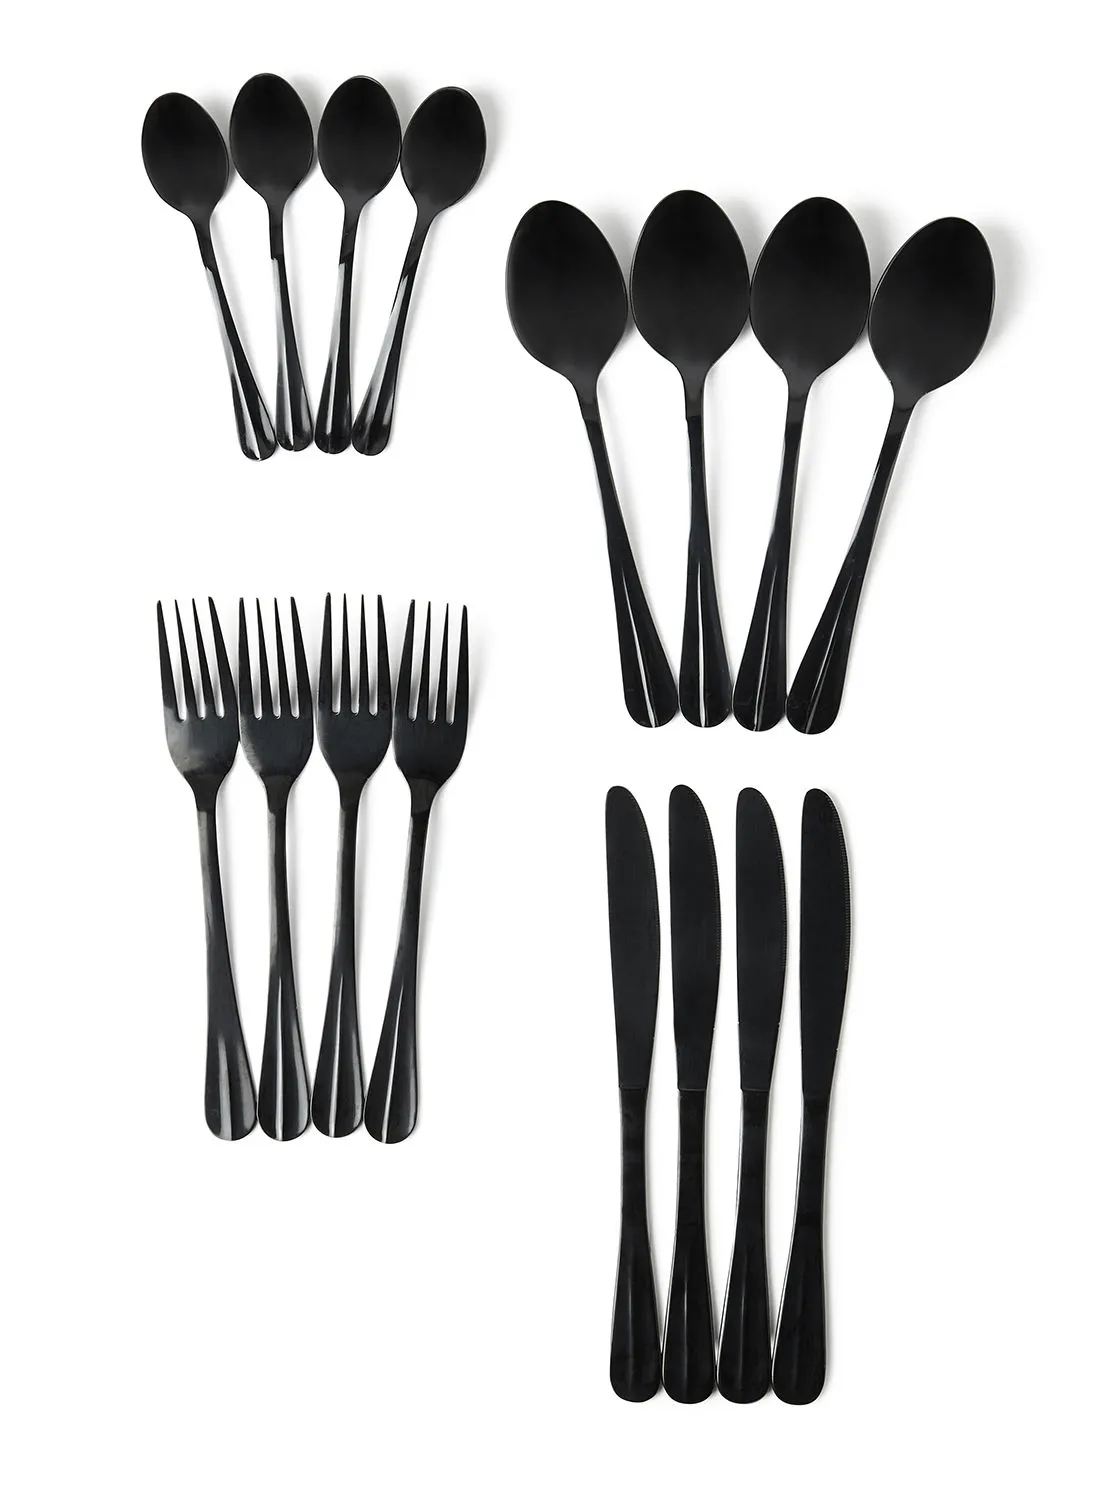 noon east 16 Piece Cutlery Set - Made Of Stainless Steel - Silverware Flatware - Spoons And Forks Set, Spoon Set - Table Spoons, Tea Spoons, Forks, Knives - Serves 4 - Design Black Flowrish